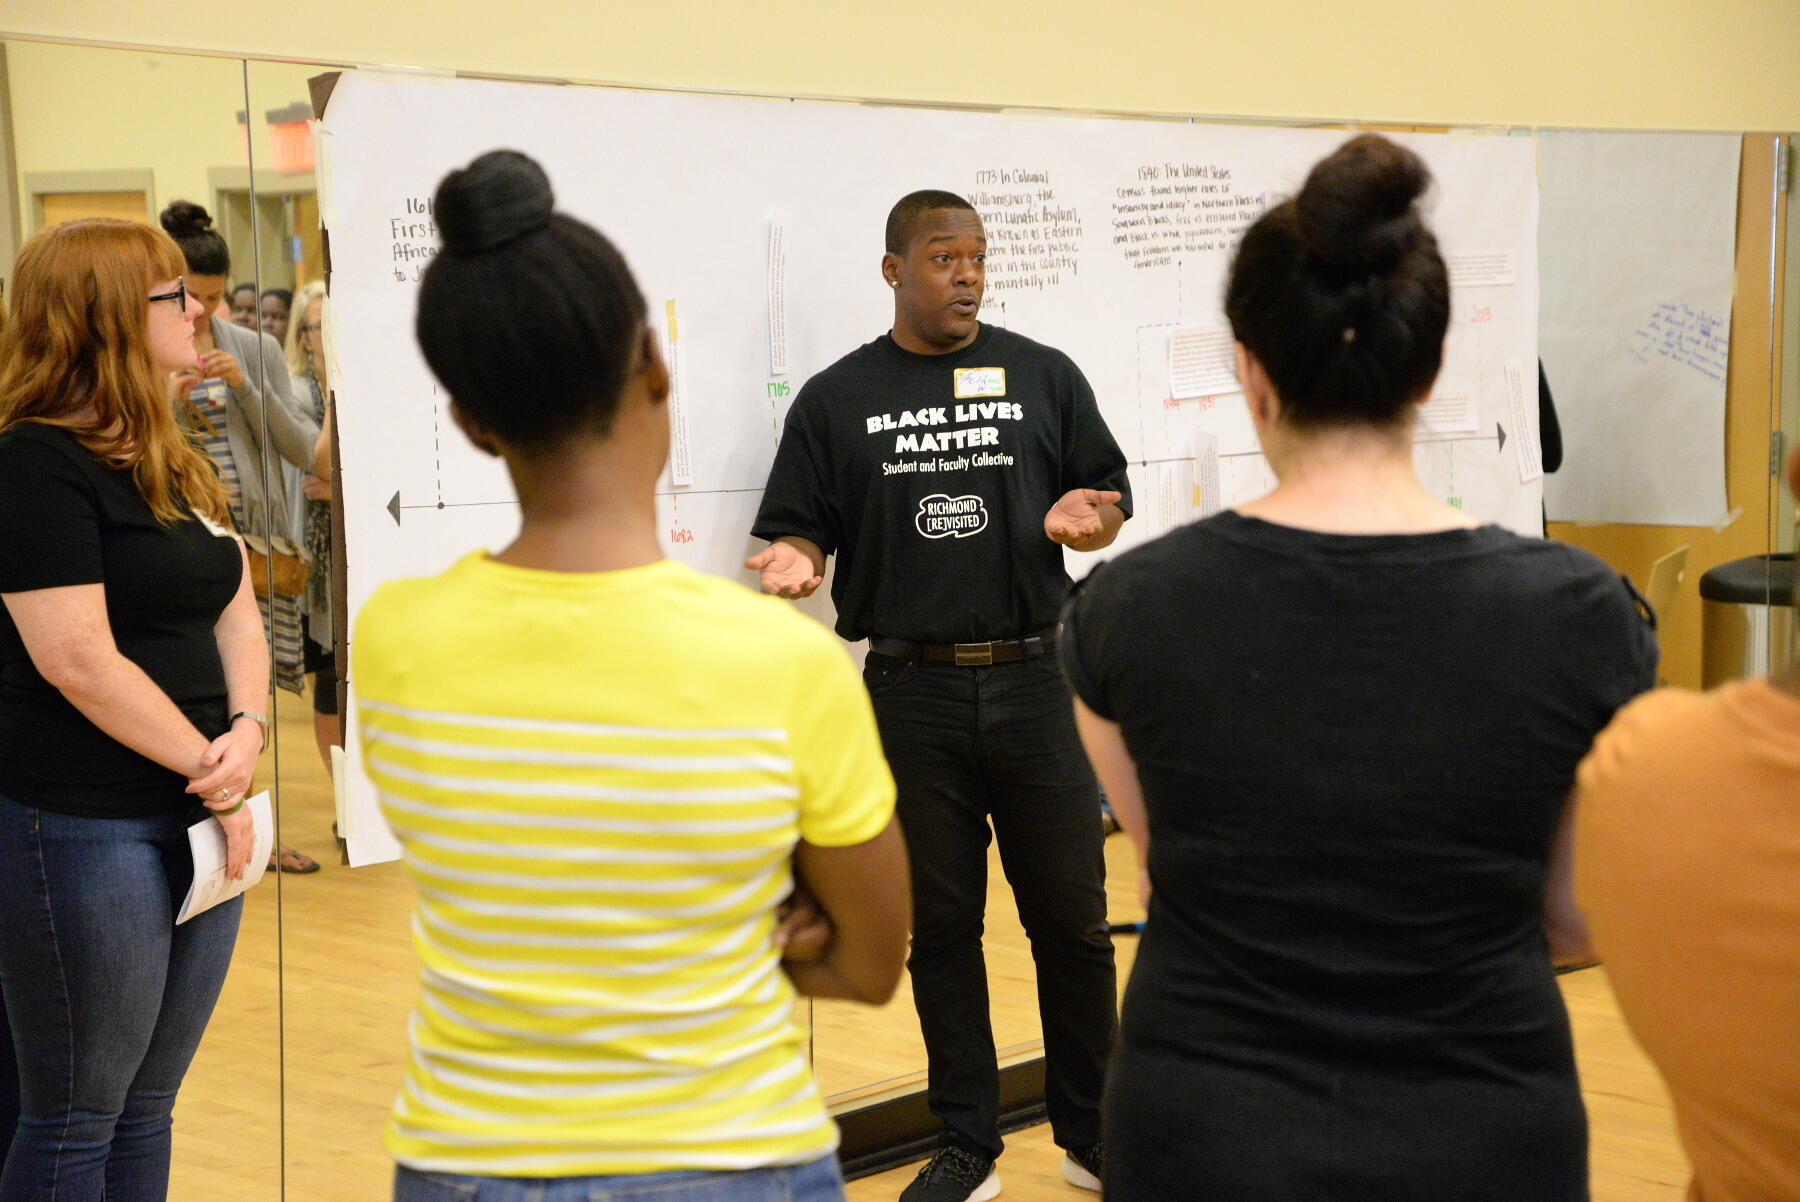 Keith Watts, a second year Ph.D. candidate in the School of Social Work and member of the VCU School of Social Work Black Lives Matter Student-Faculty-Alumni Collective, discusses key dates in American history related to race and mental health.